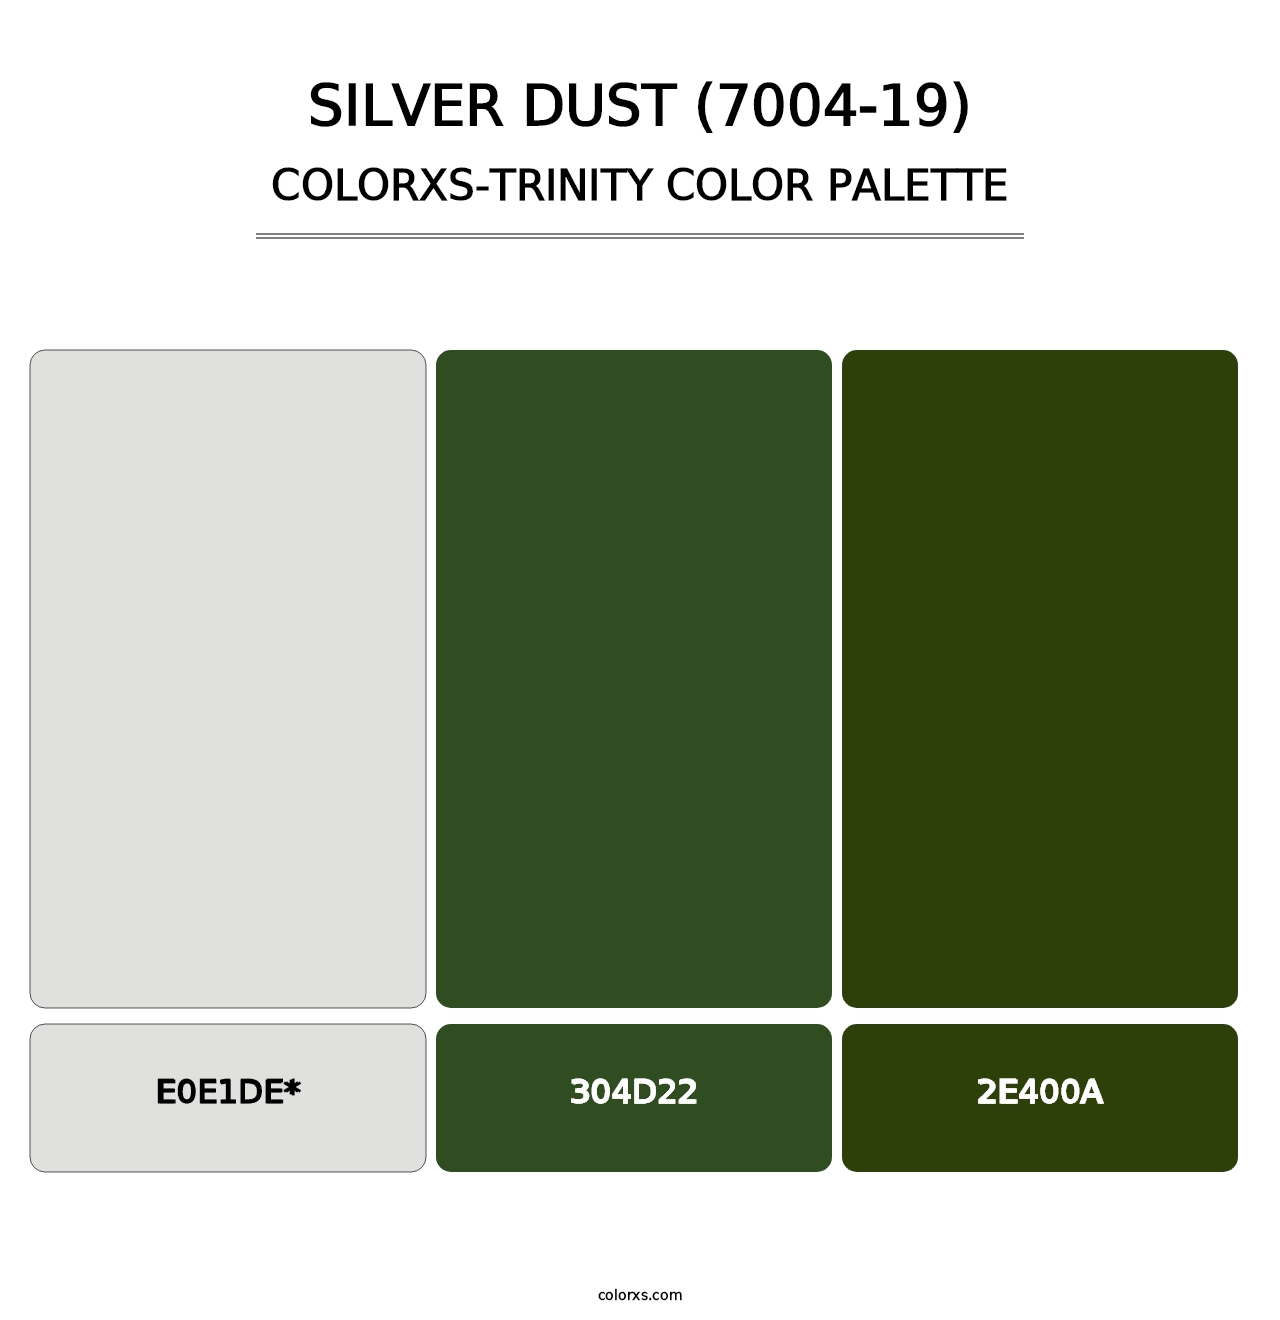 Silver Dust (7004-19) - Colorxs Trinity Palette